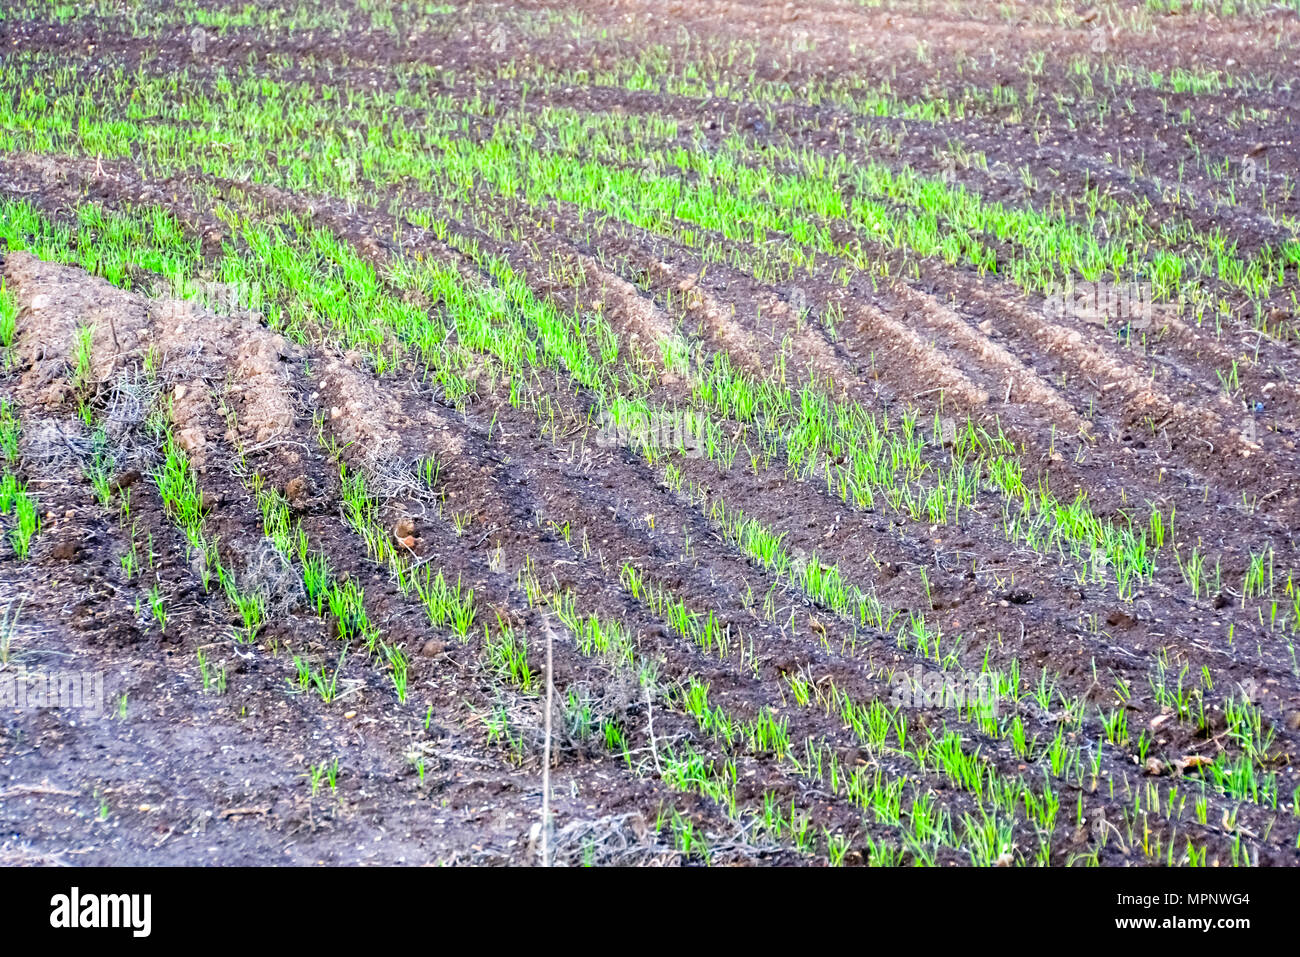 Wheat blades grow out of the ground in a harsh environment Stock Photo